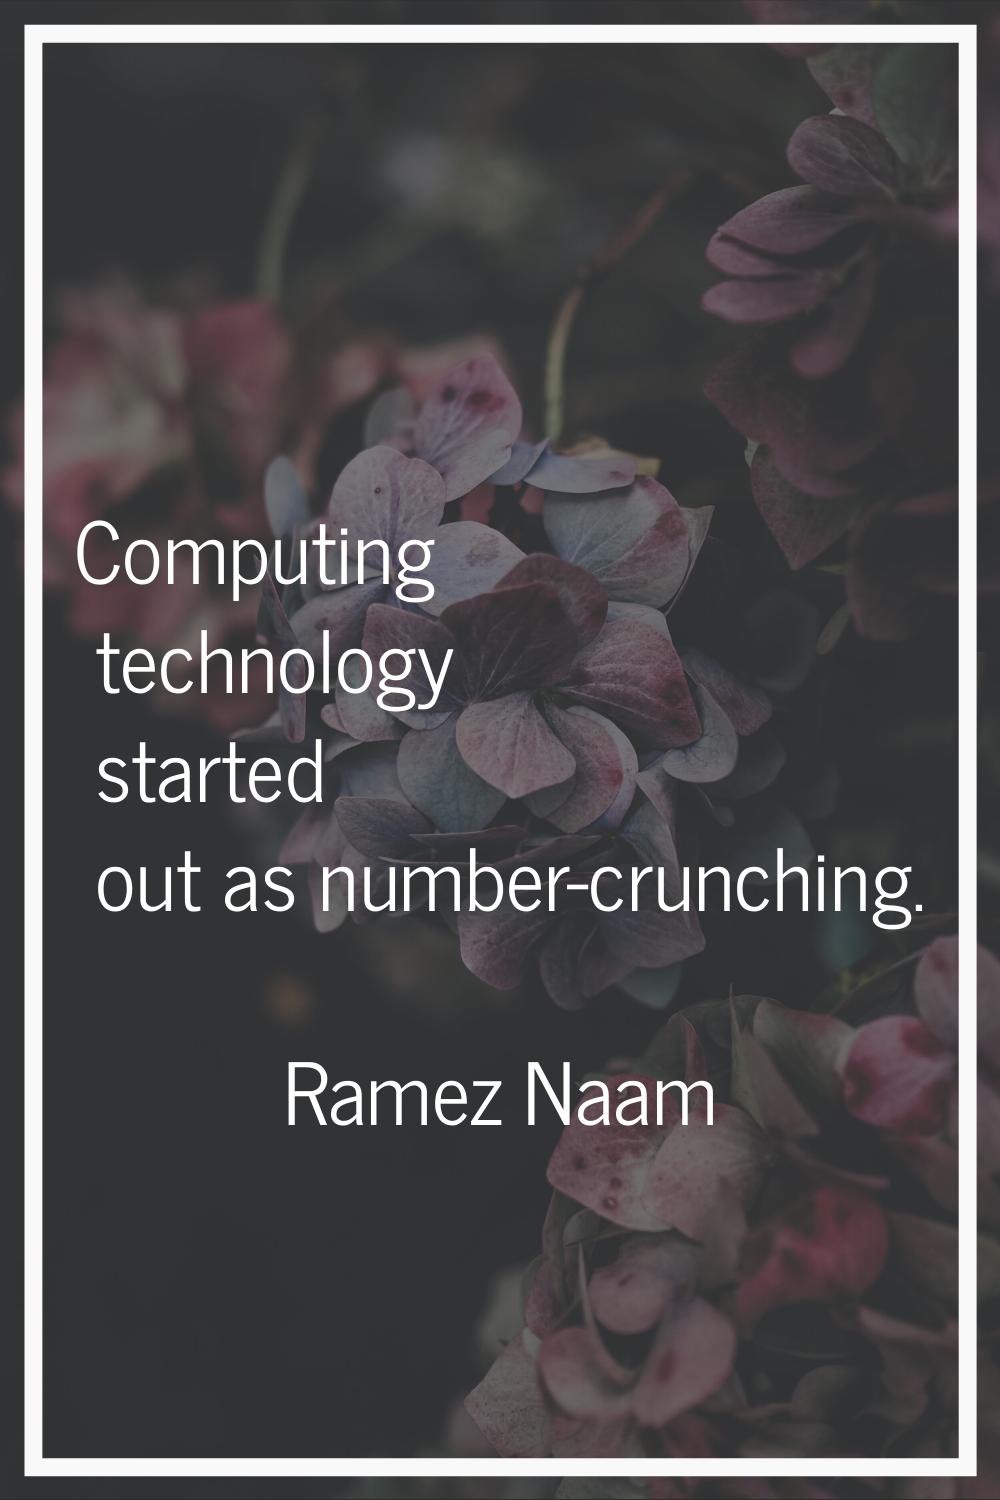 Computing technology started out as number-crunching.